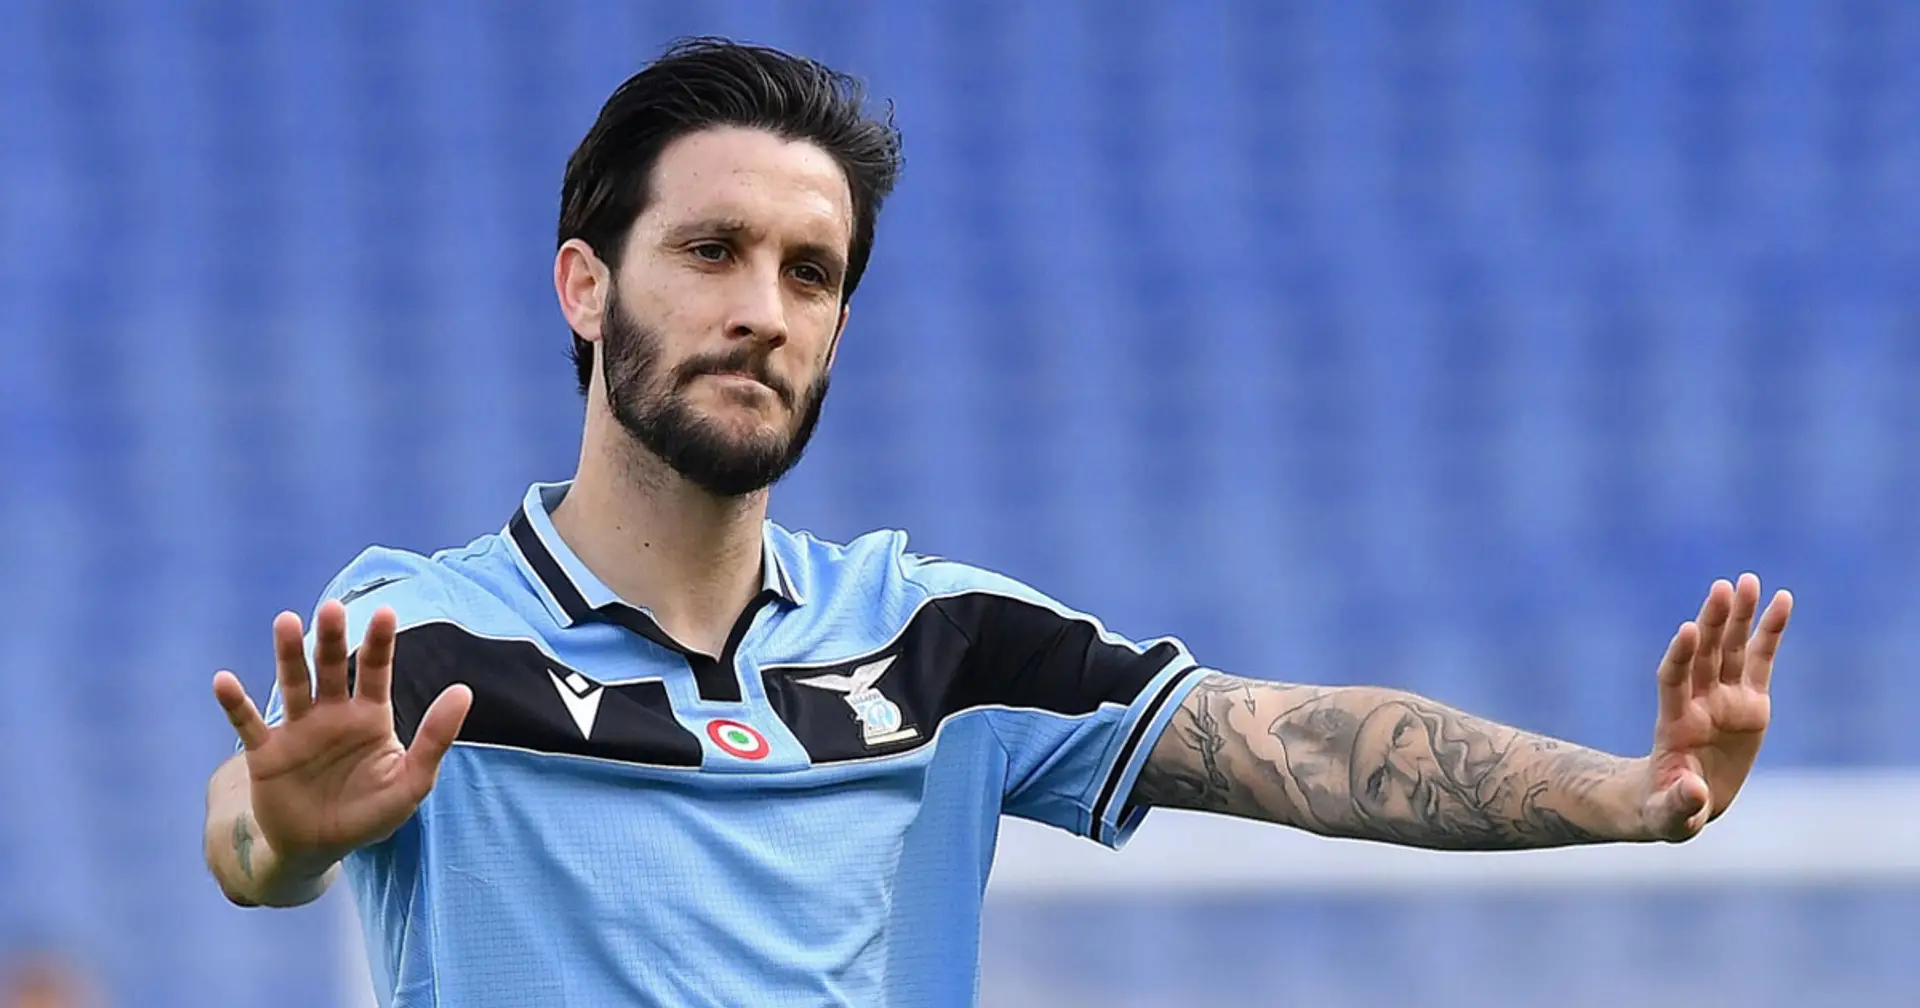 Lazio's Luis Alberto reflects on why his Liverpool spell flopped: 'I think it’s a little bit my fault'